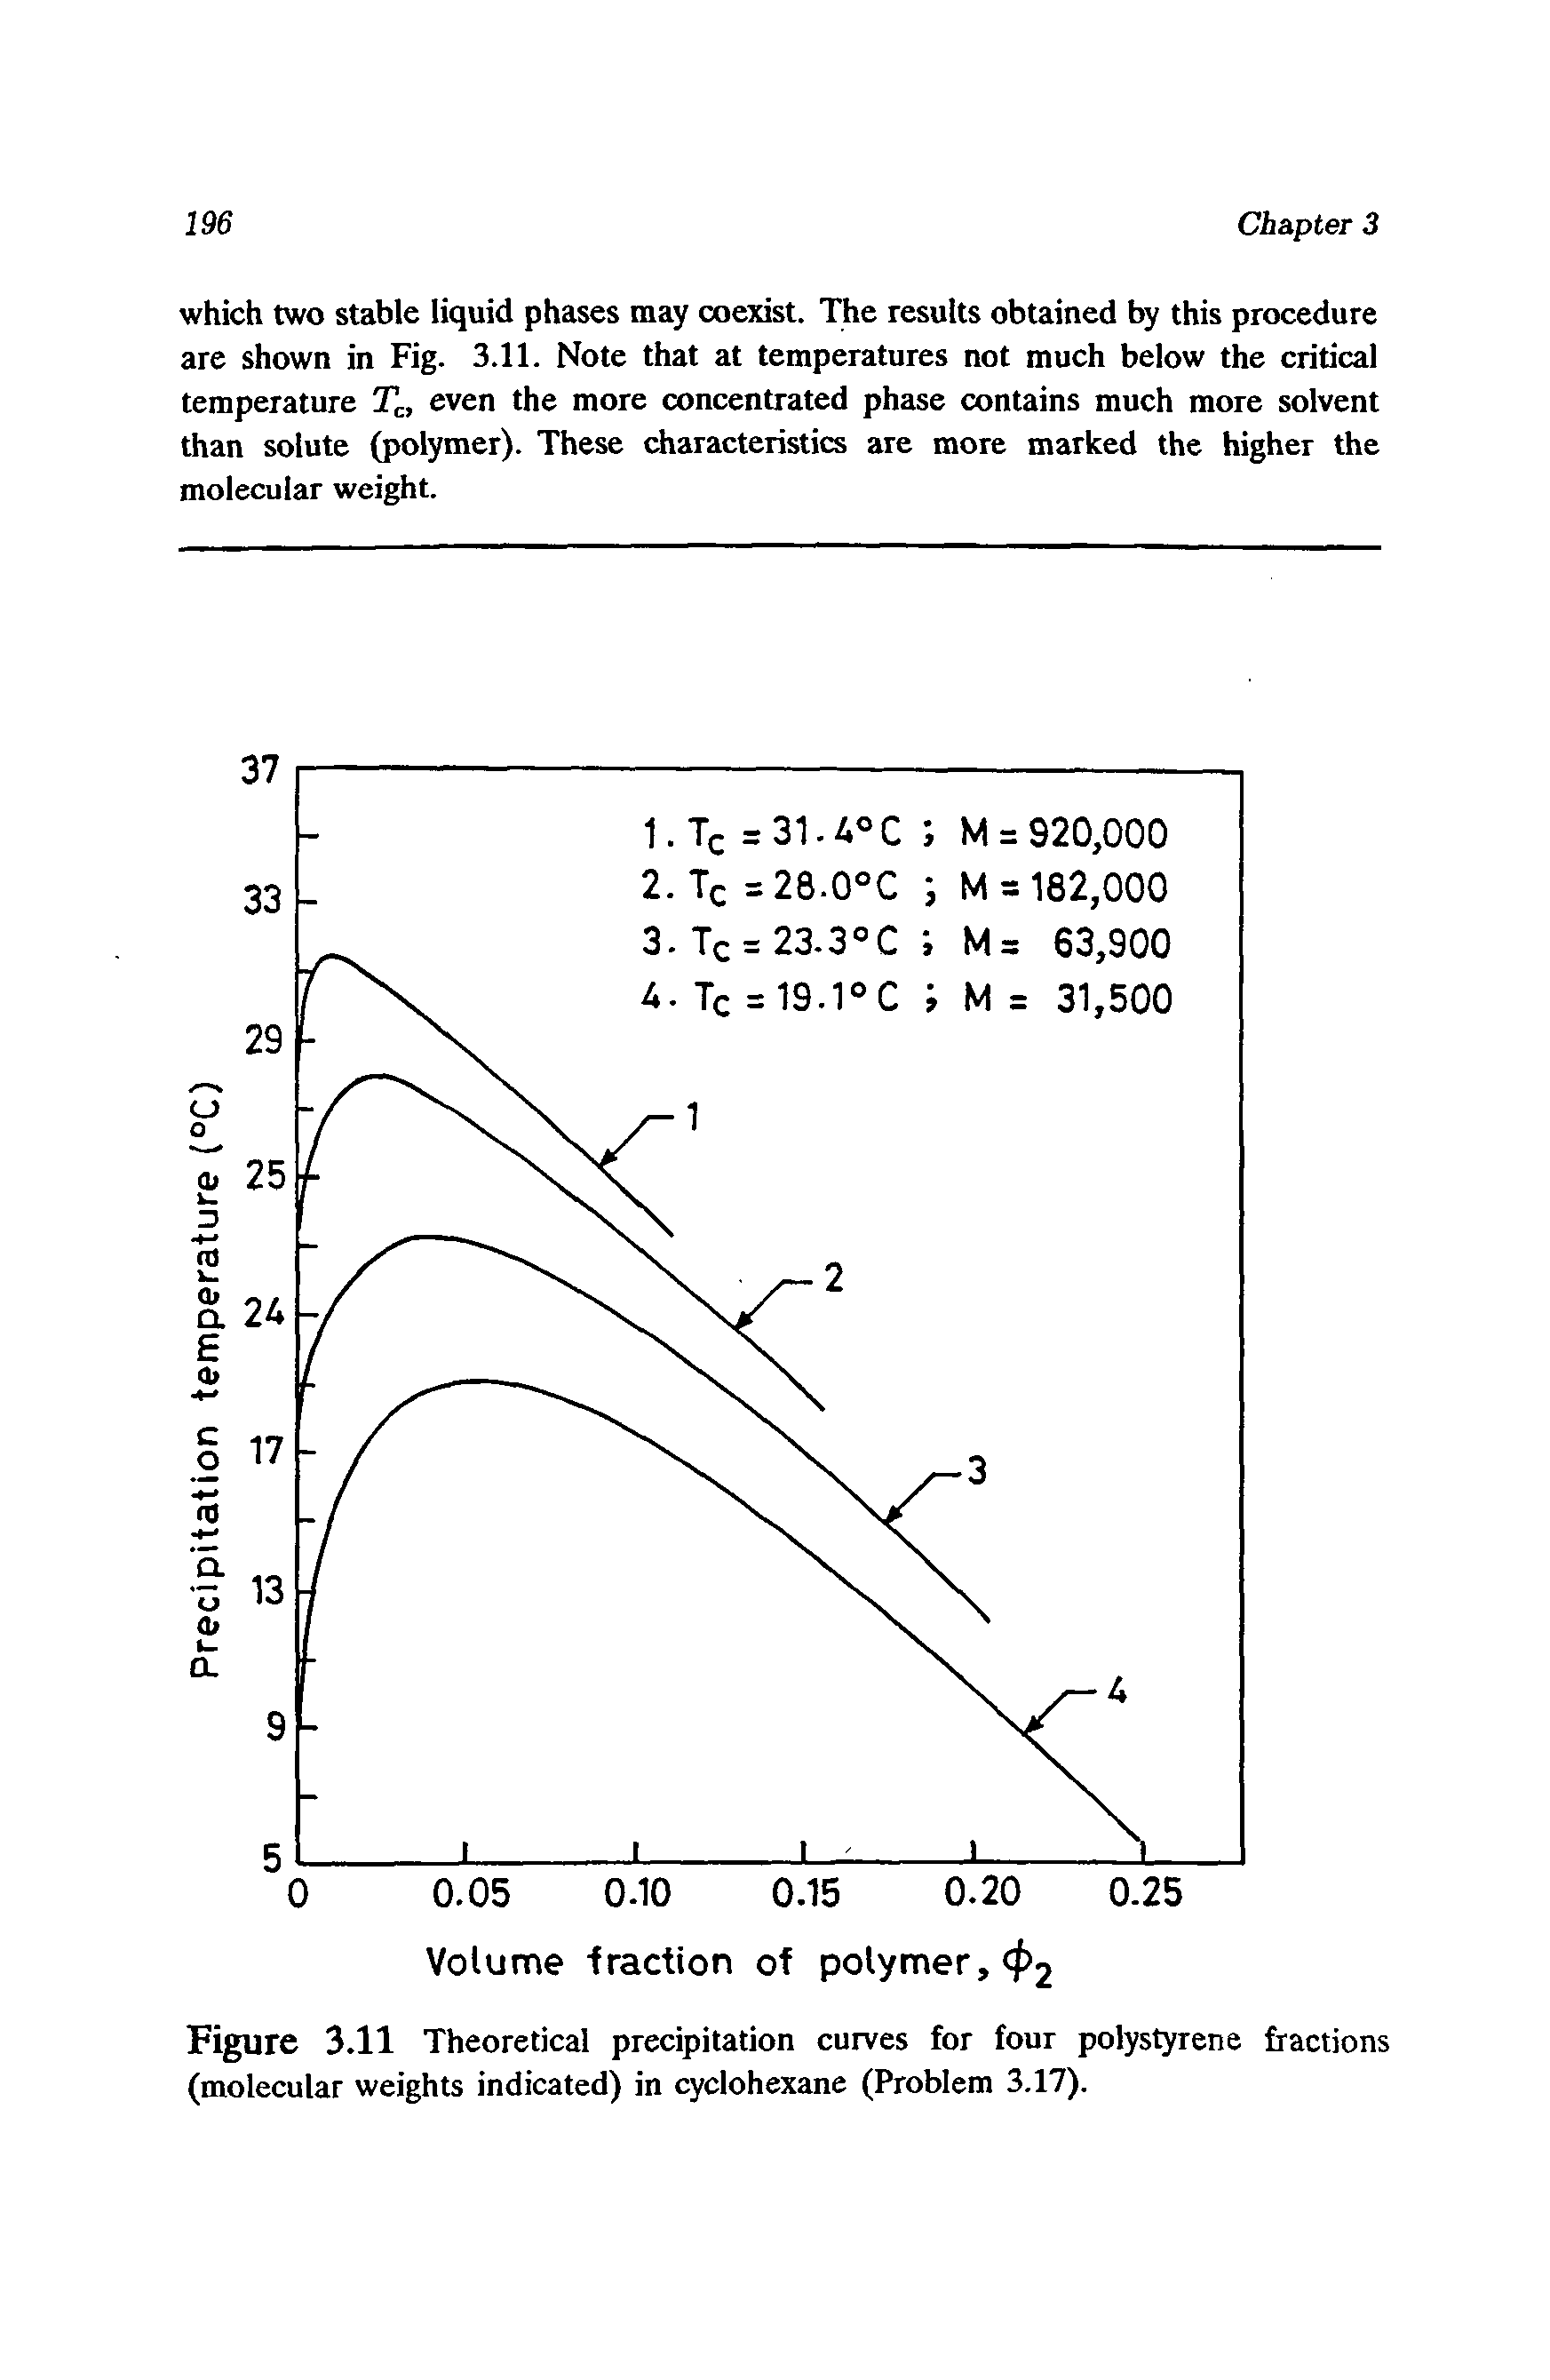 Figure 3.11 Theoretical precipitation curves for four polystyrene fractions (molecular weights indicated) in cyclohexane (Problem 3.17).